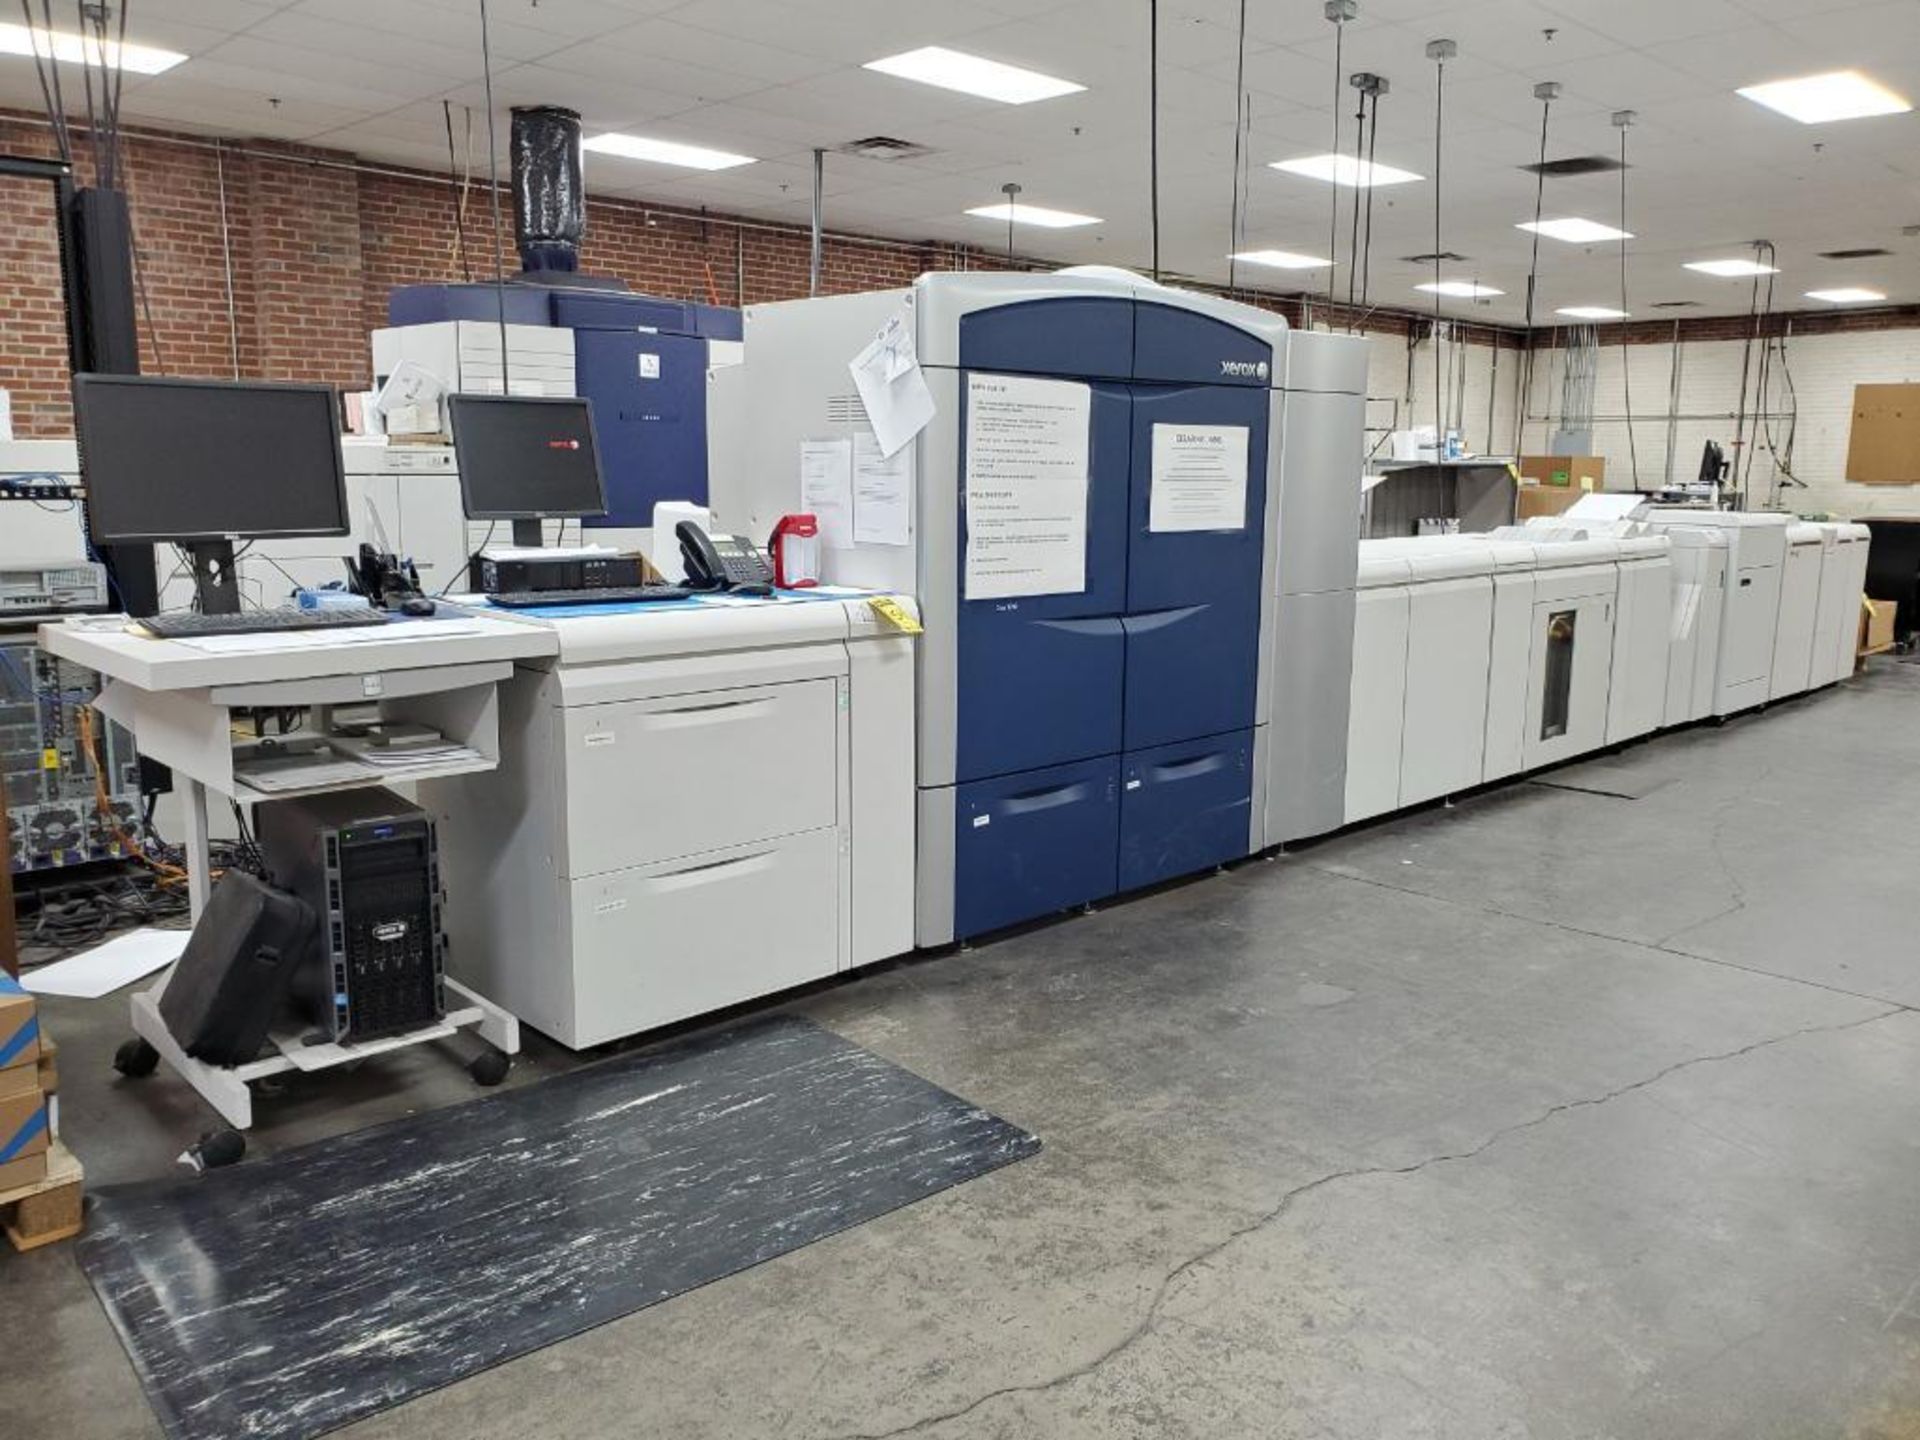 2012 Xerox Color 1000 Press Printer, Plockmatic Pro 50 Production Booklet Maker Finisher, Stacker Ca - Image 4 of 21